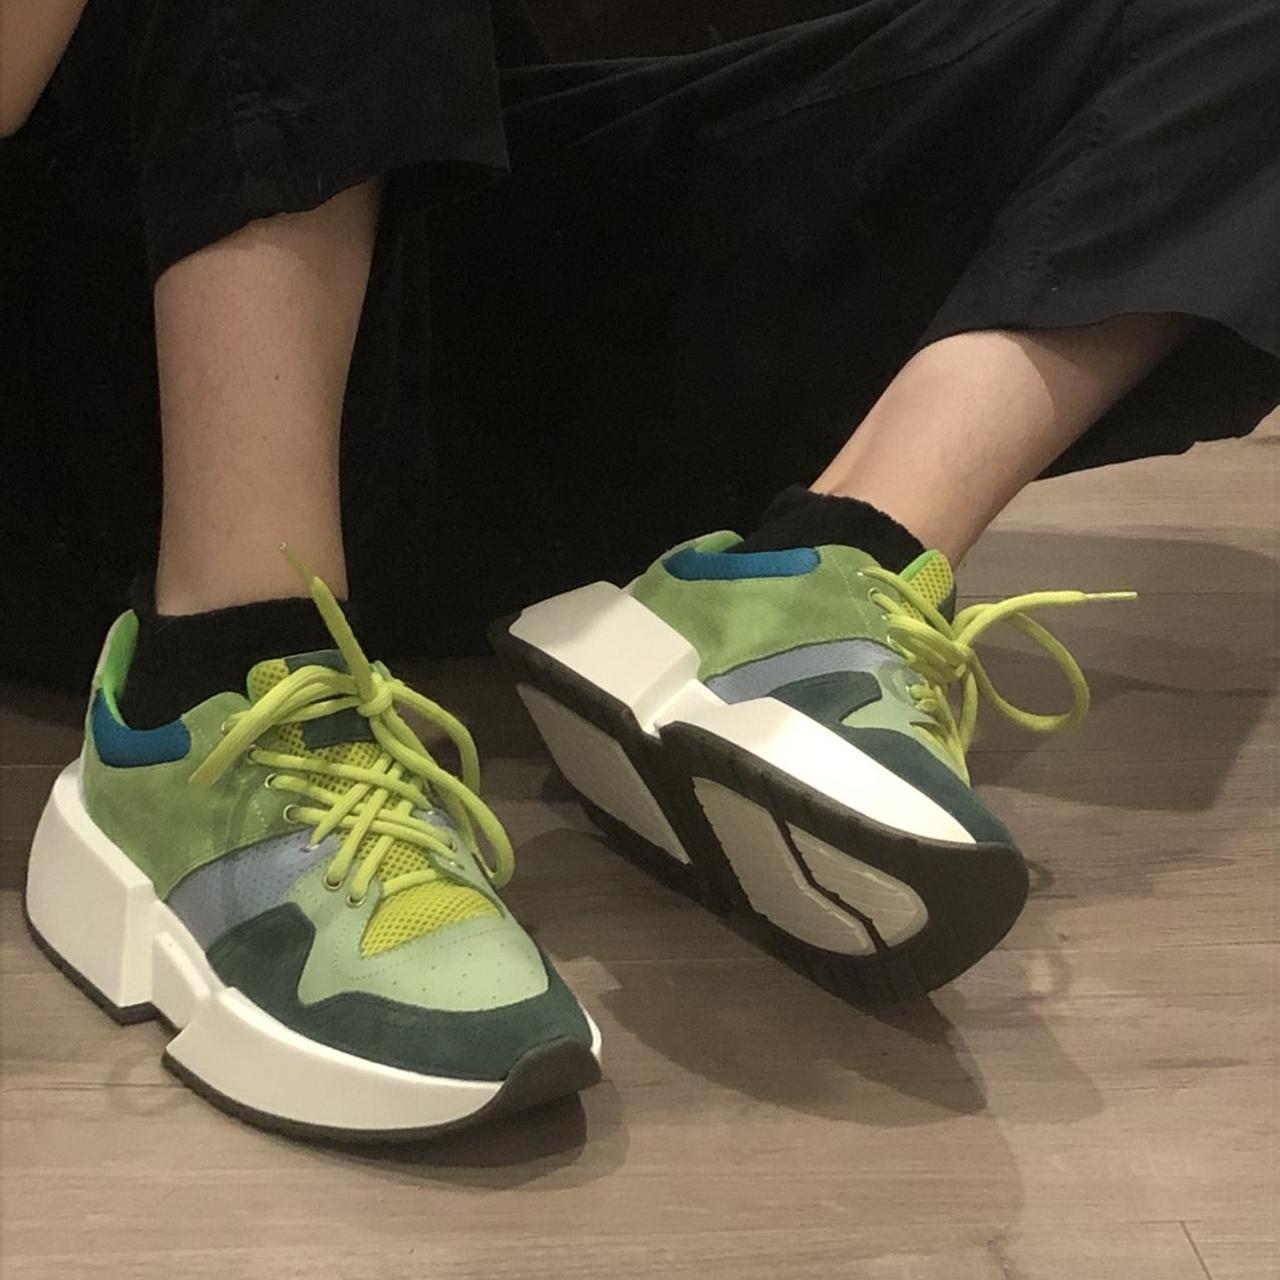 MM6 Maison Margiela green chunky sneakers/trainers...